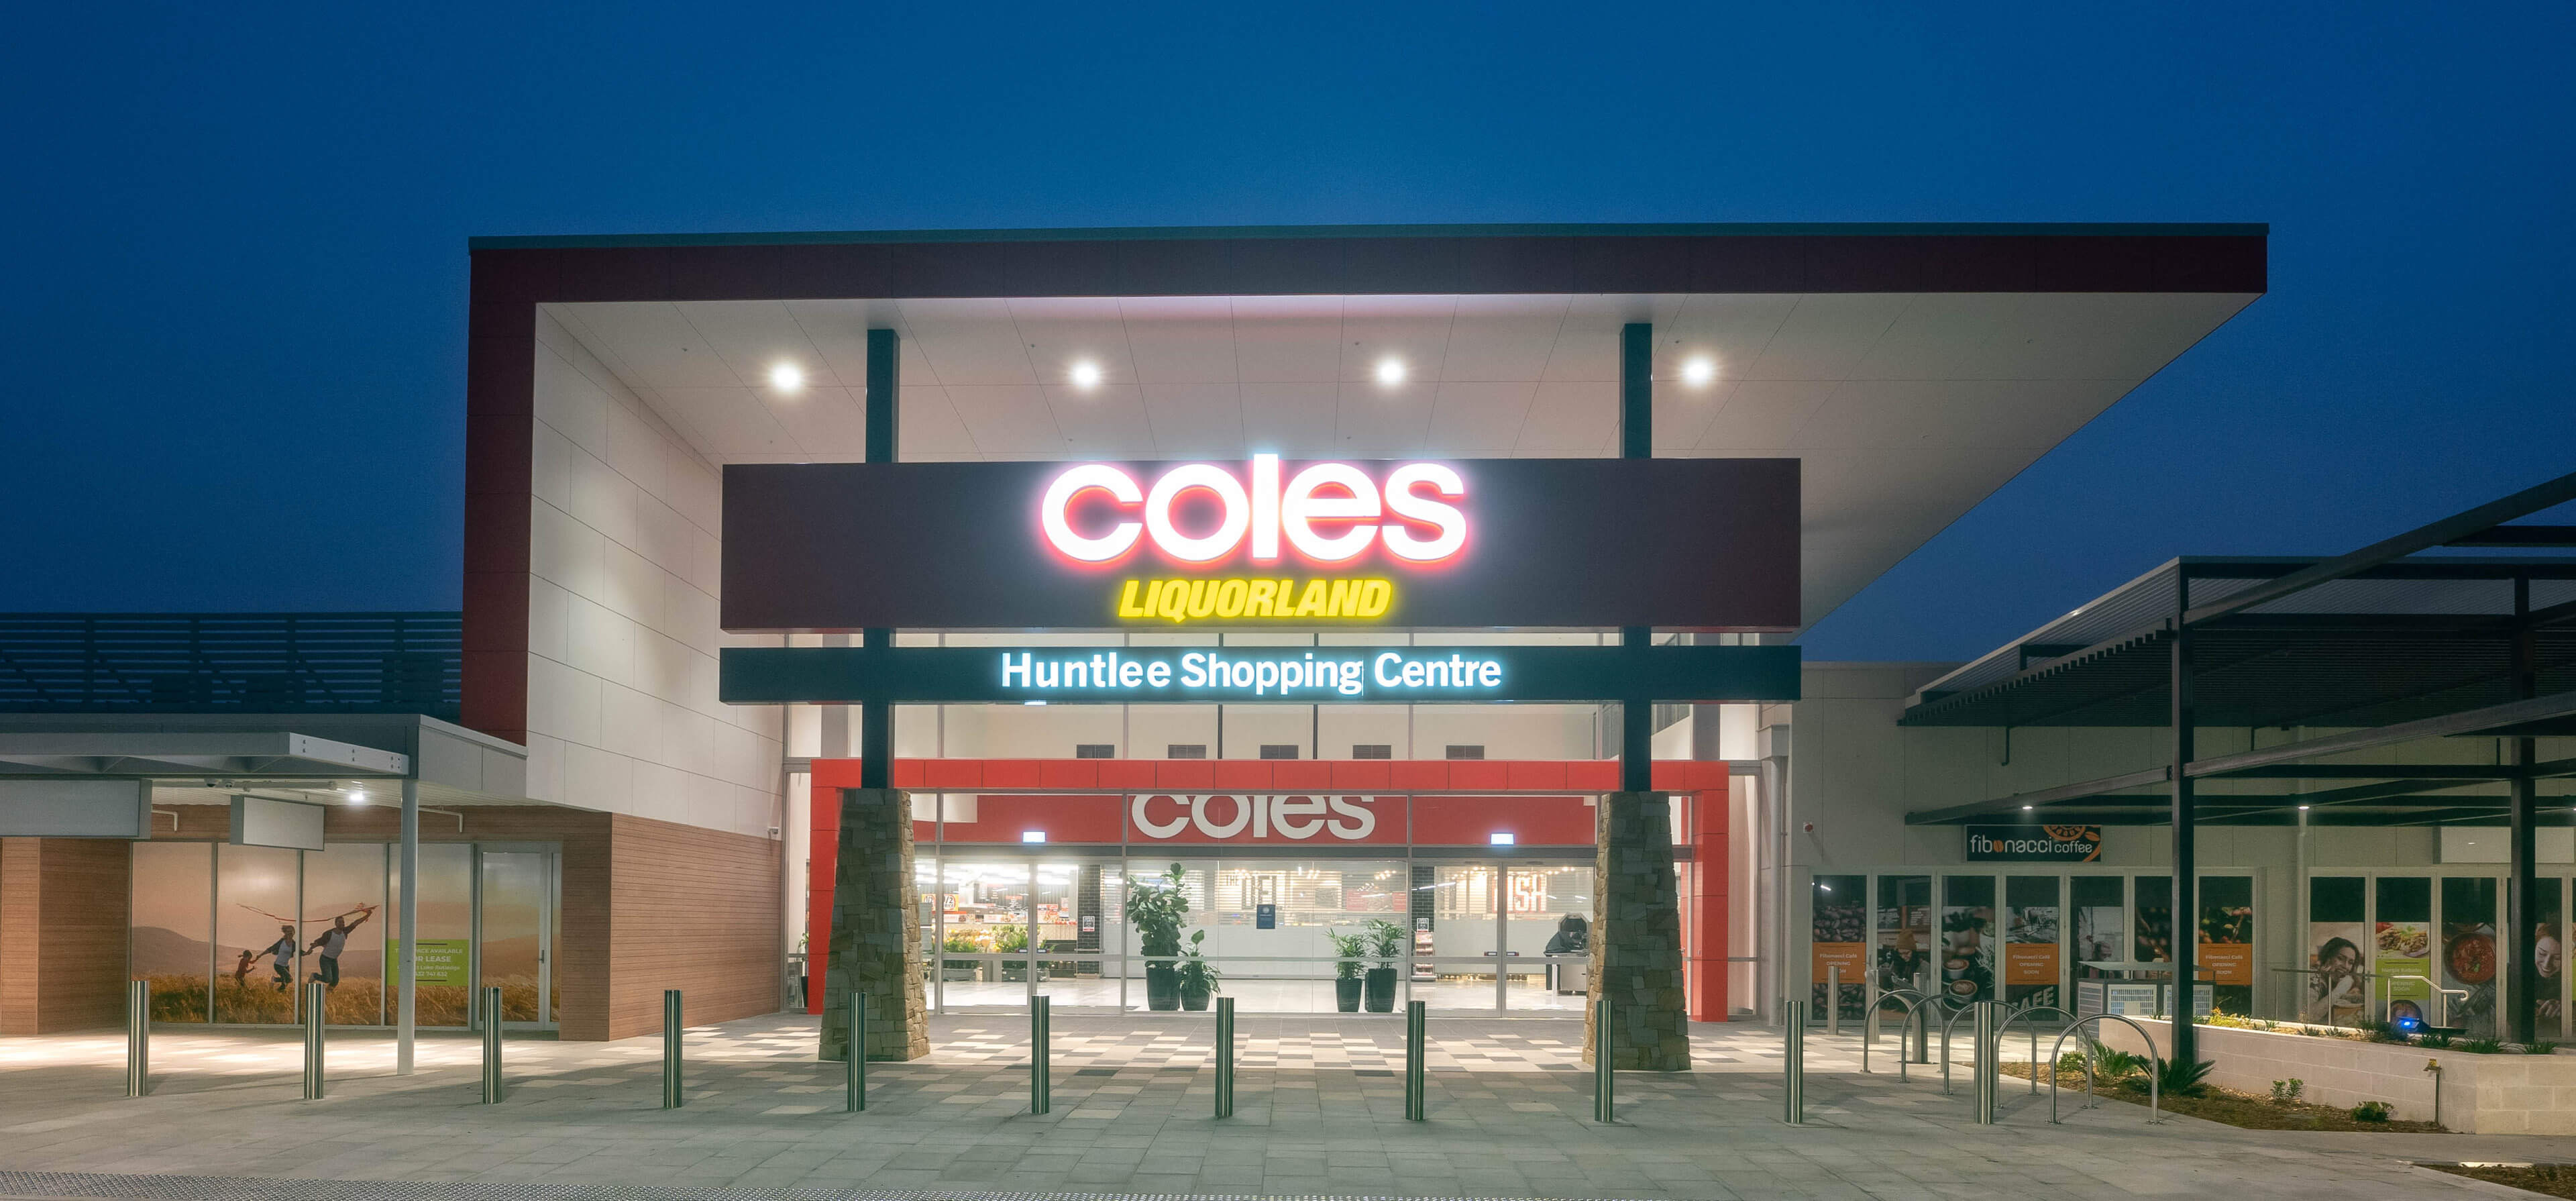 12 night entrance at coles huntlee taylor construction retail